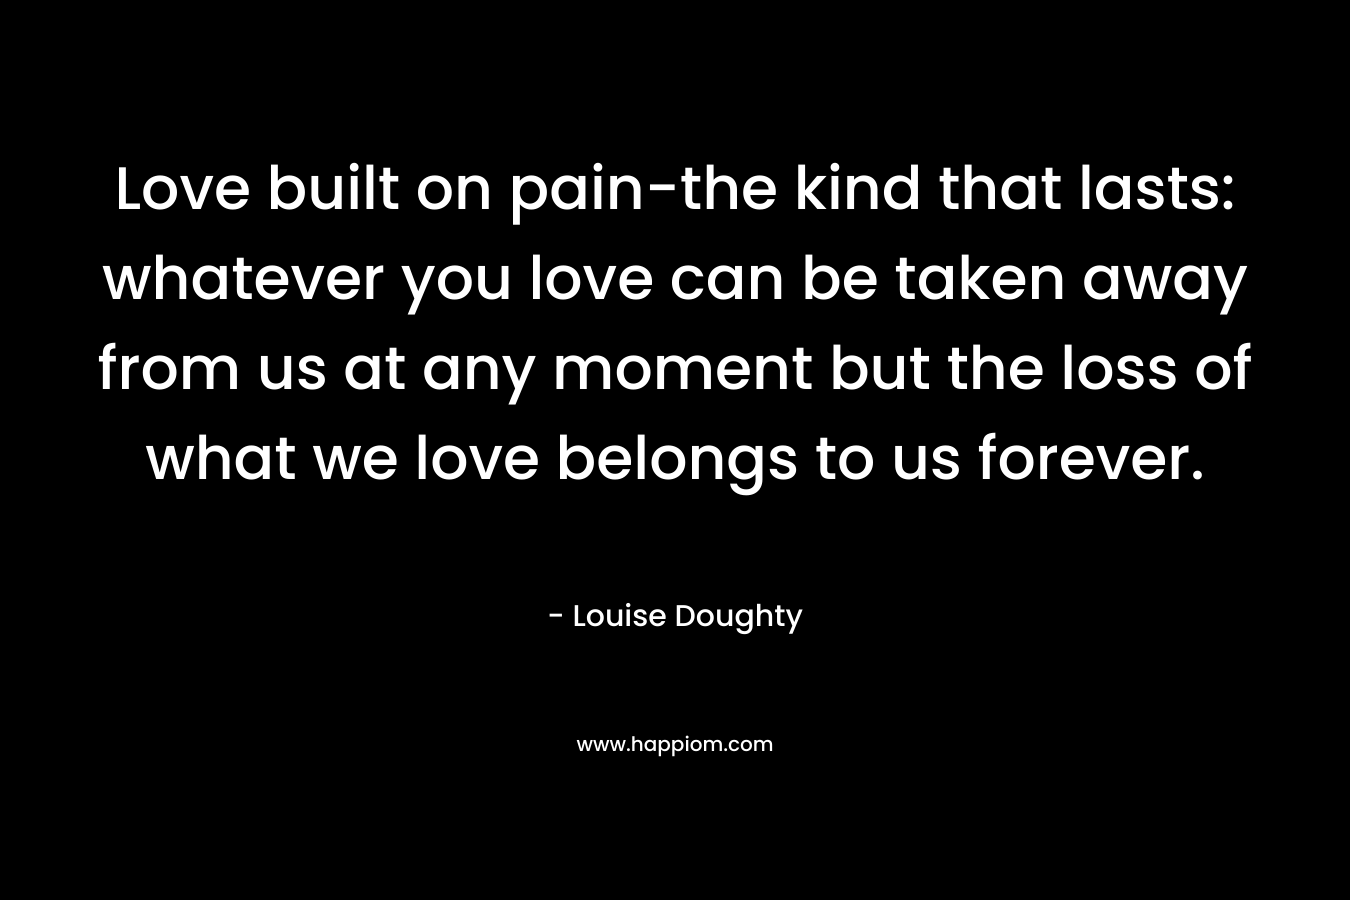 Love built on pain-the kind that lasts: whatever you love can be taken away from us at any moment but the loss of what we love belongs to us forever.